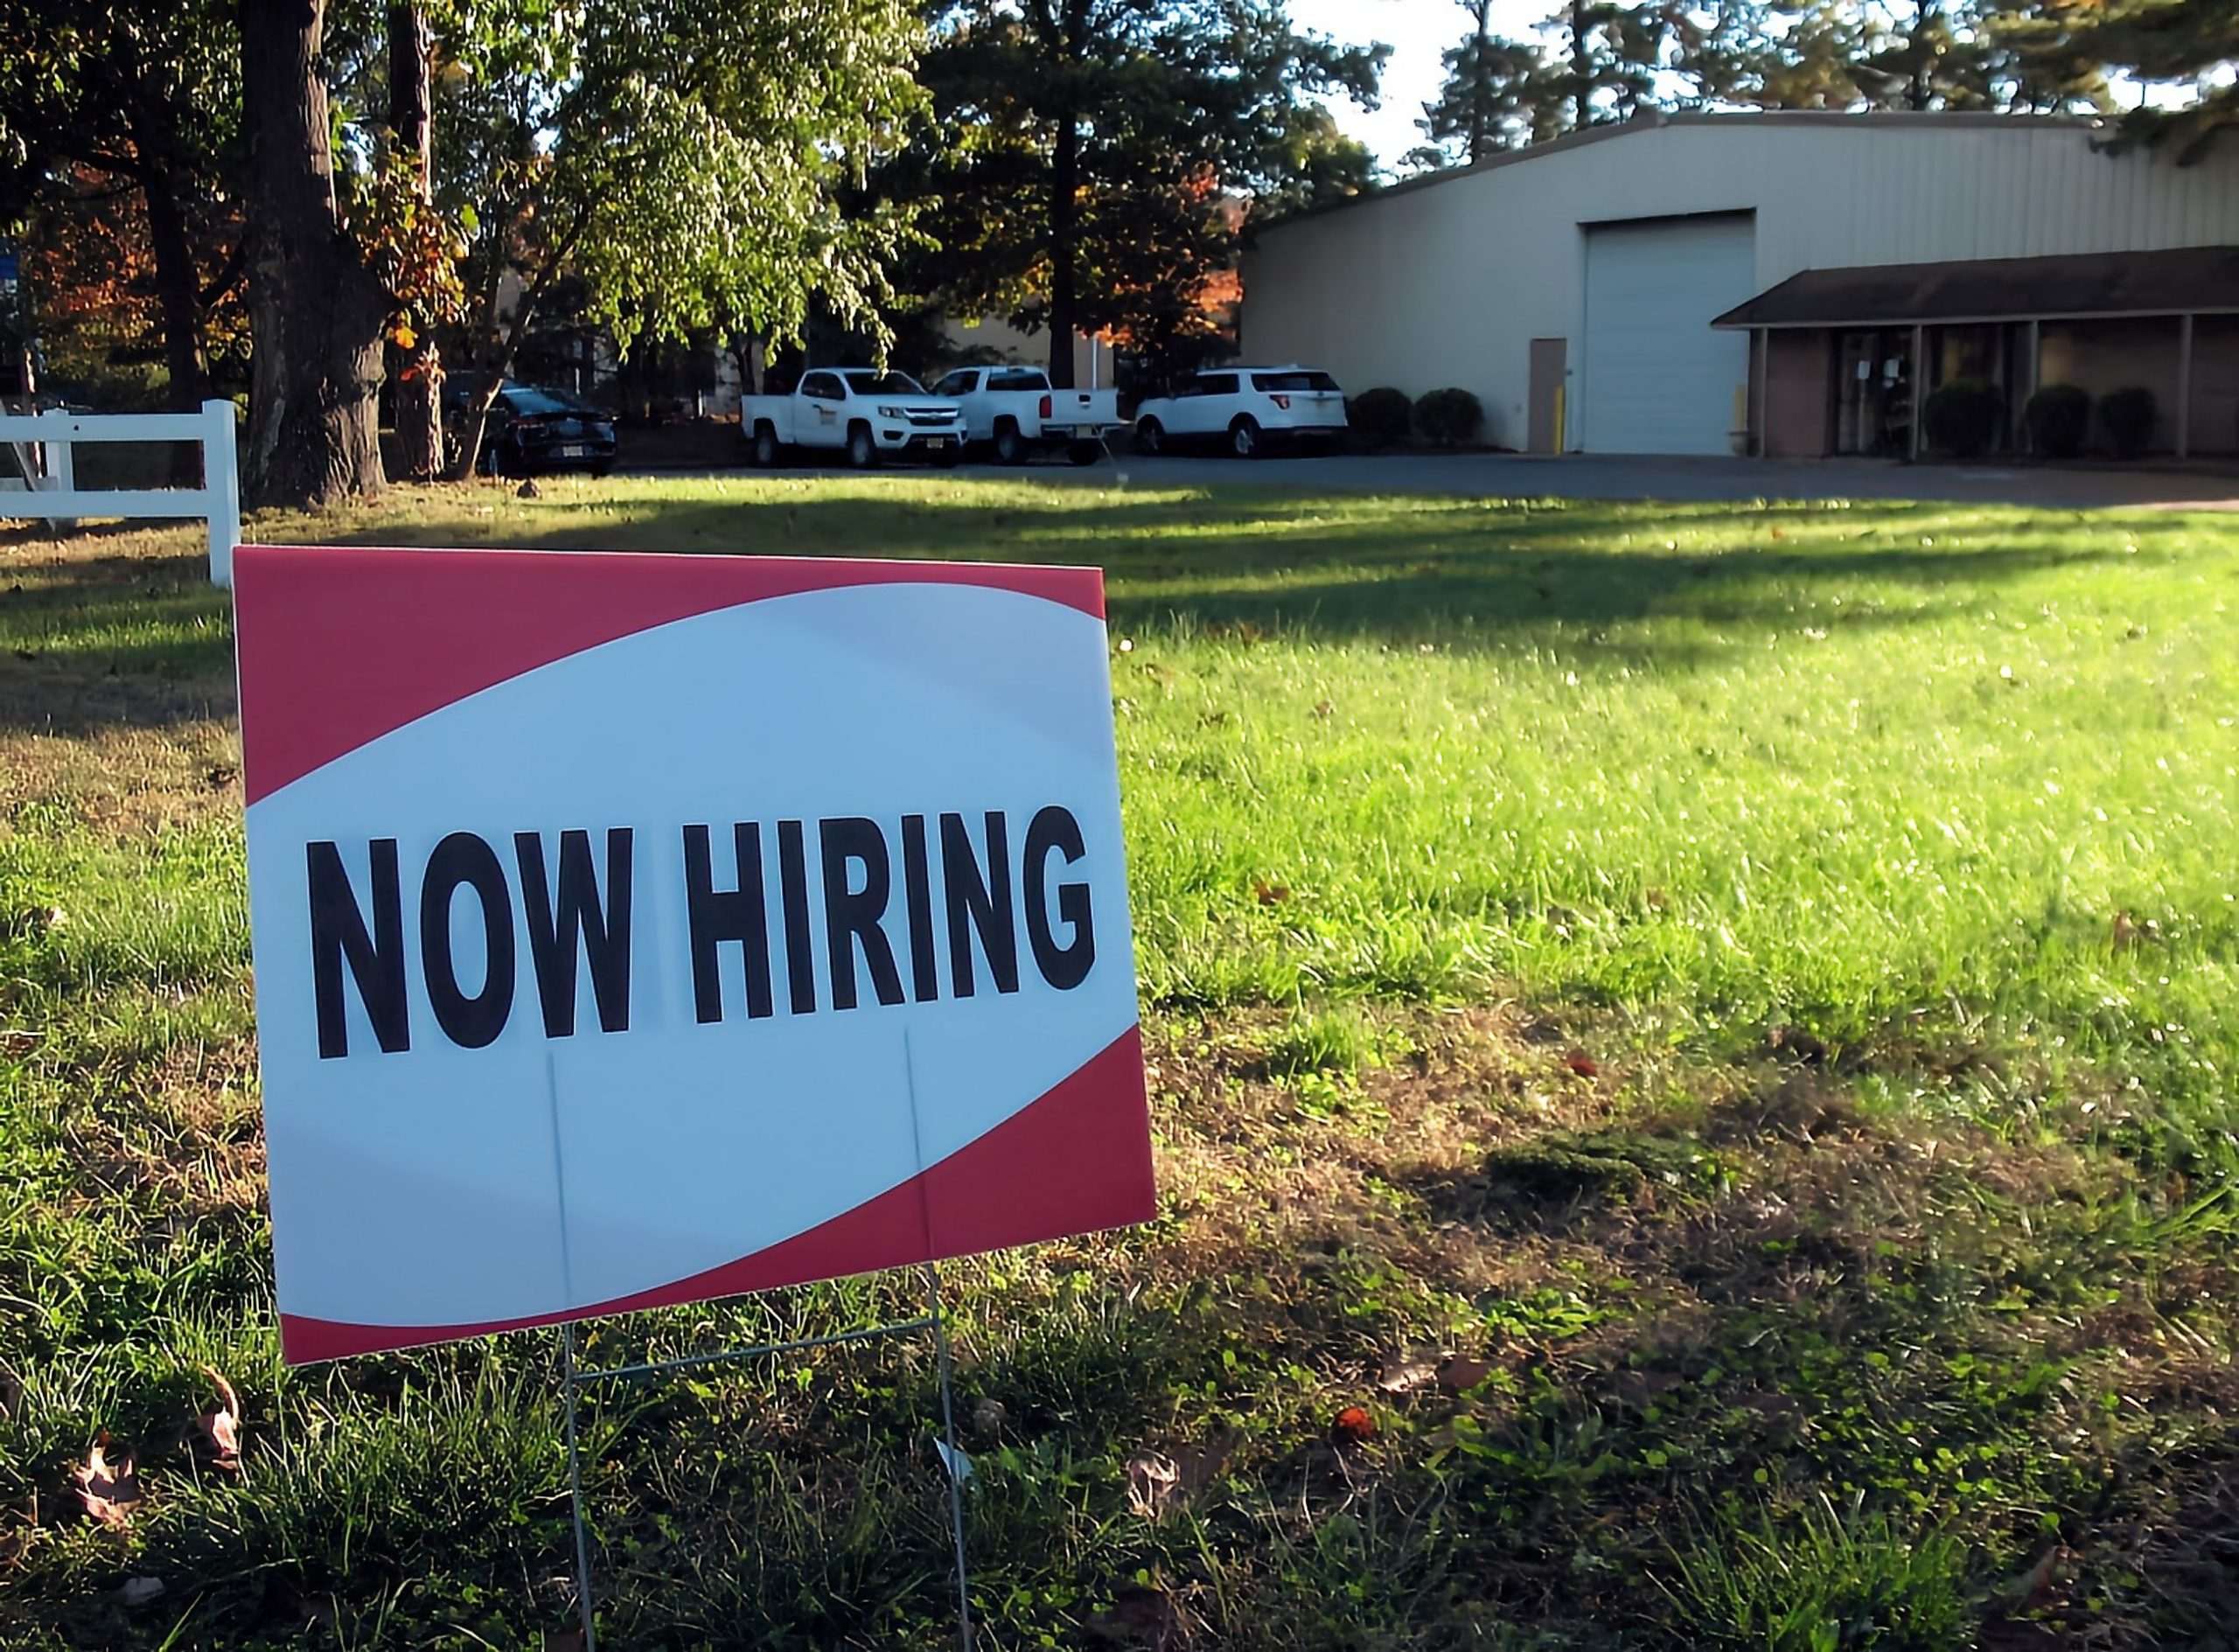 US employers add 261,000 jobs in October, unemployment rate up at 3.7%